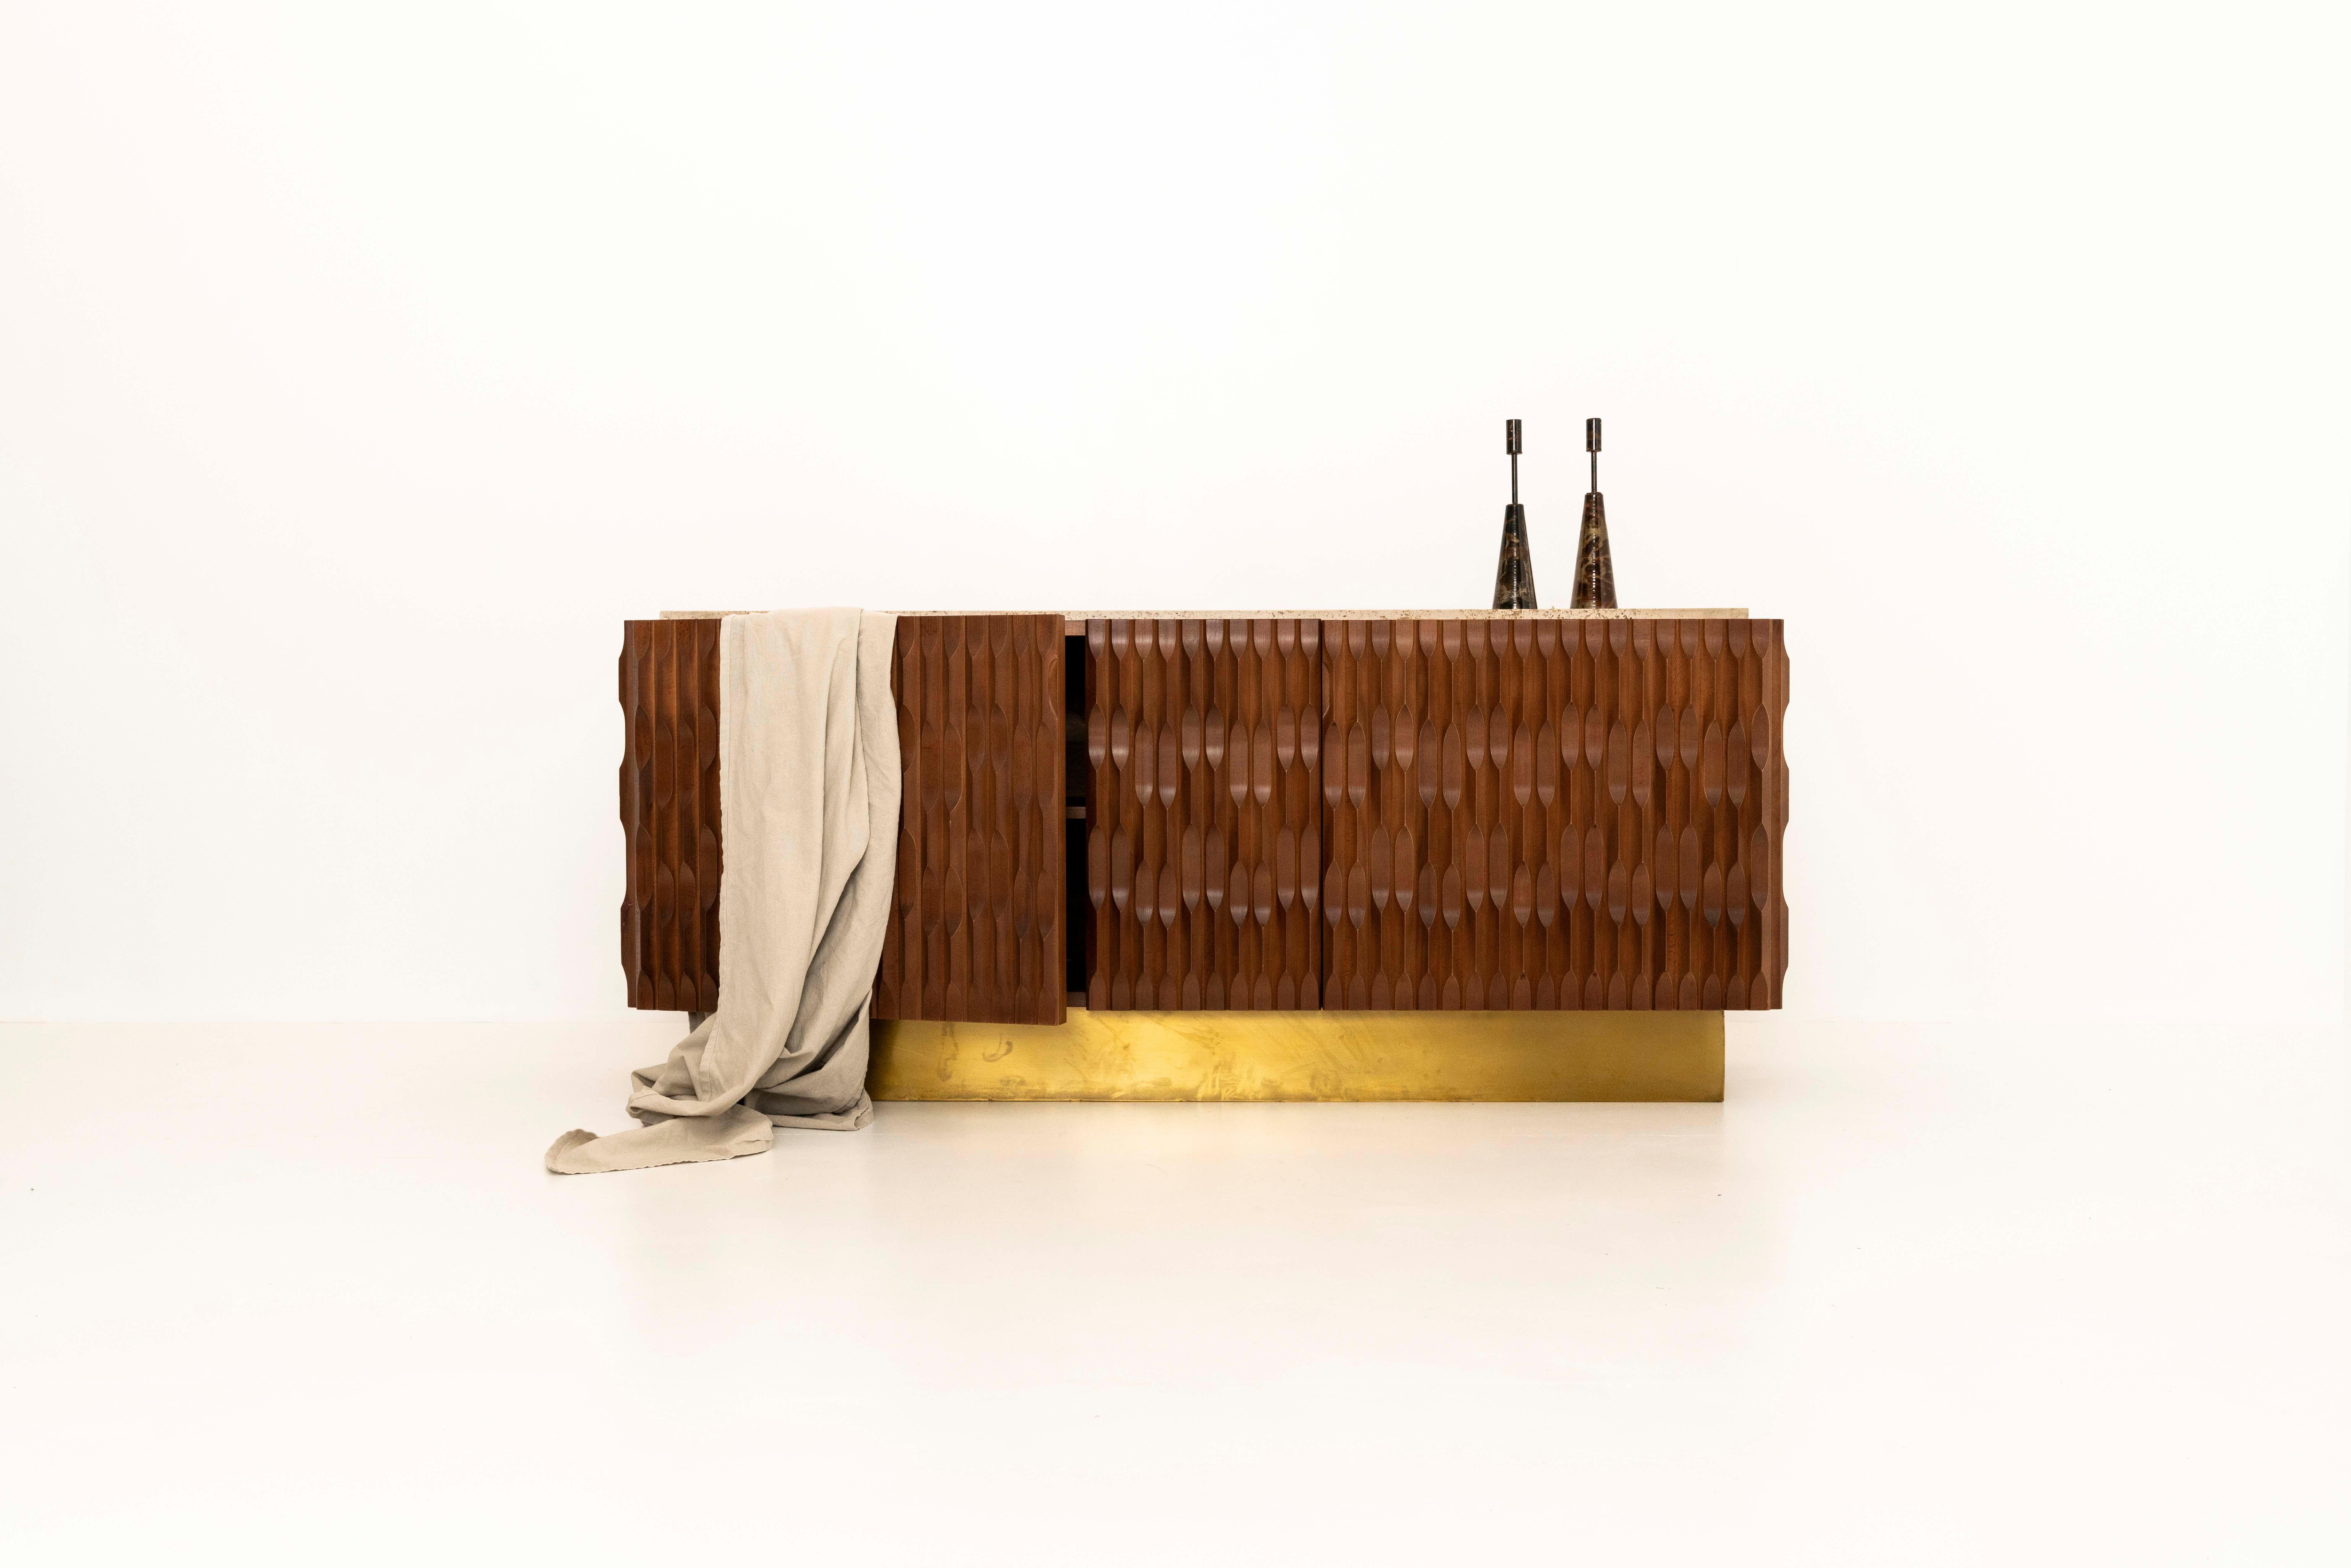 Italian Brutalist Sideboard with Wood, Brass and Travertine, 1970s For Sale 2